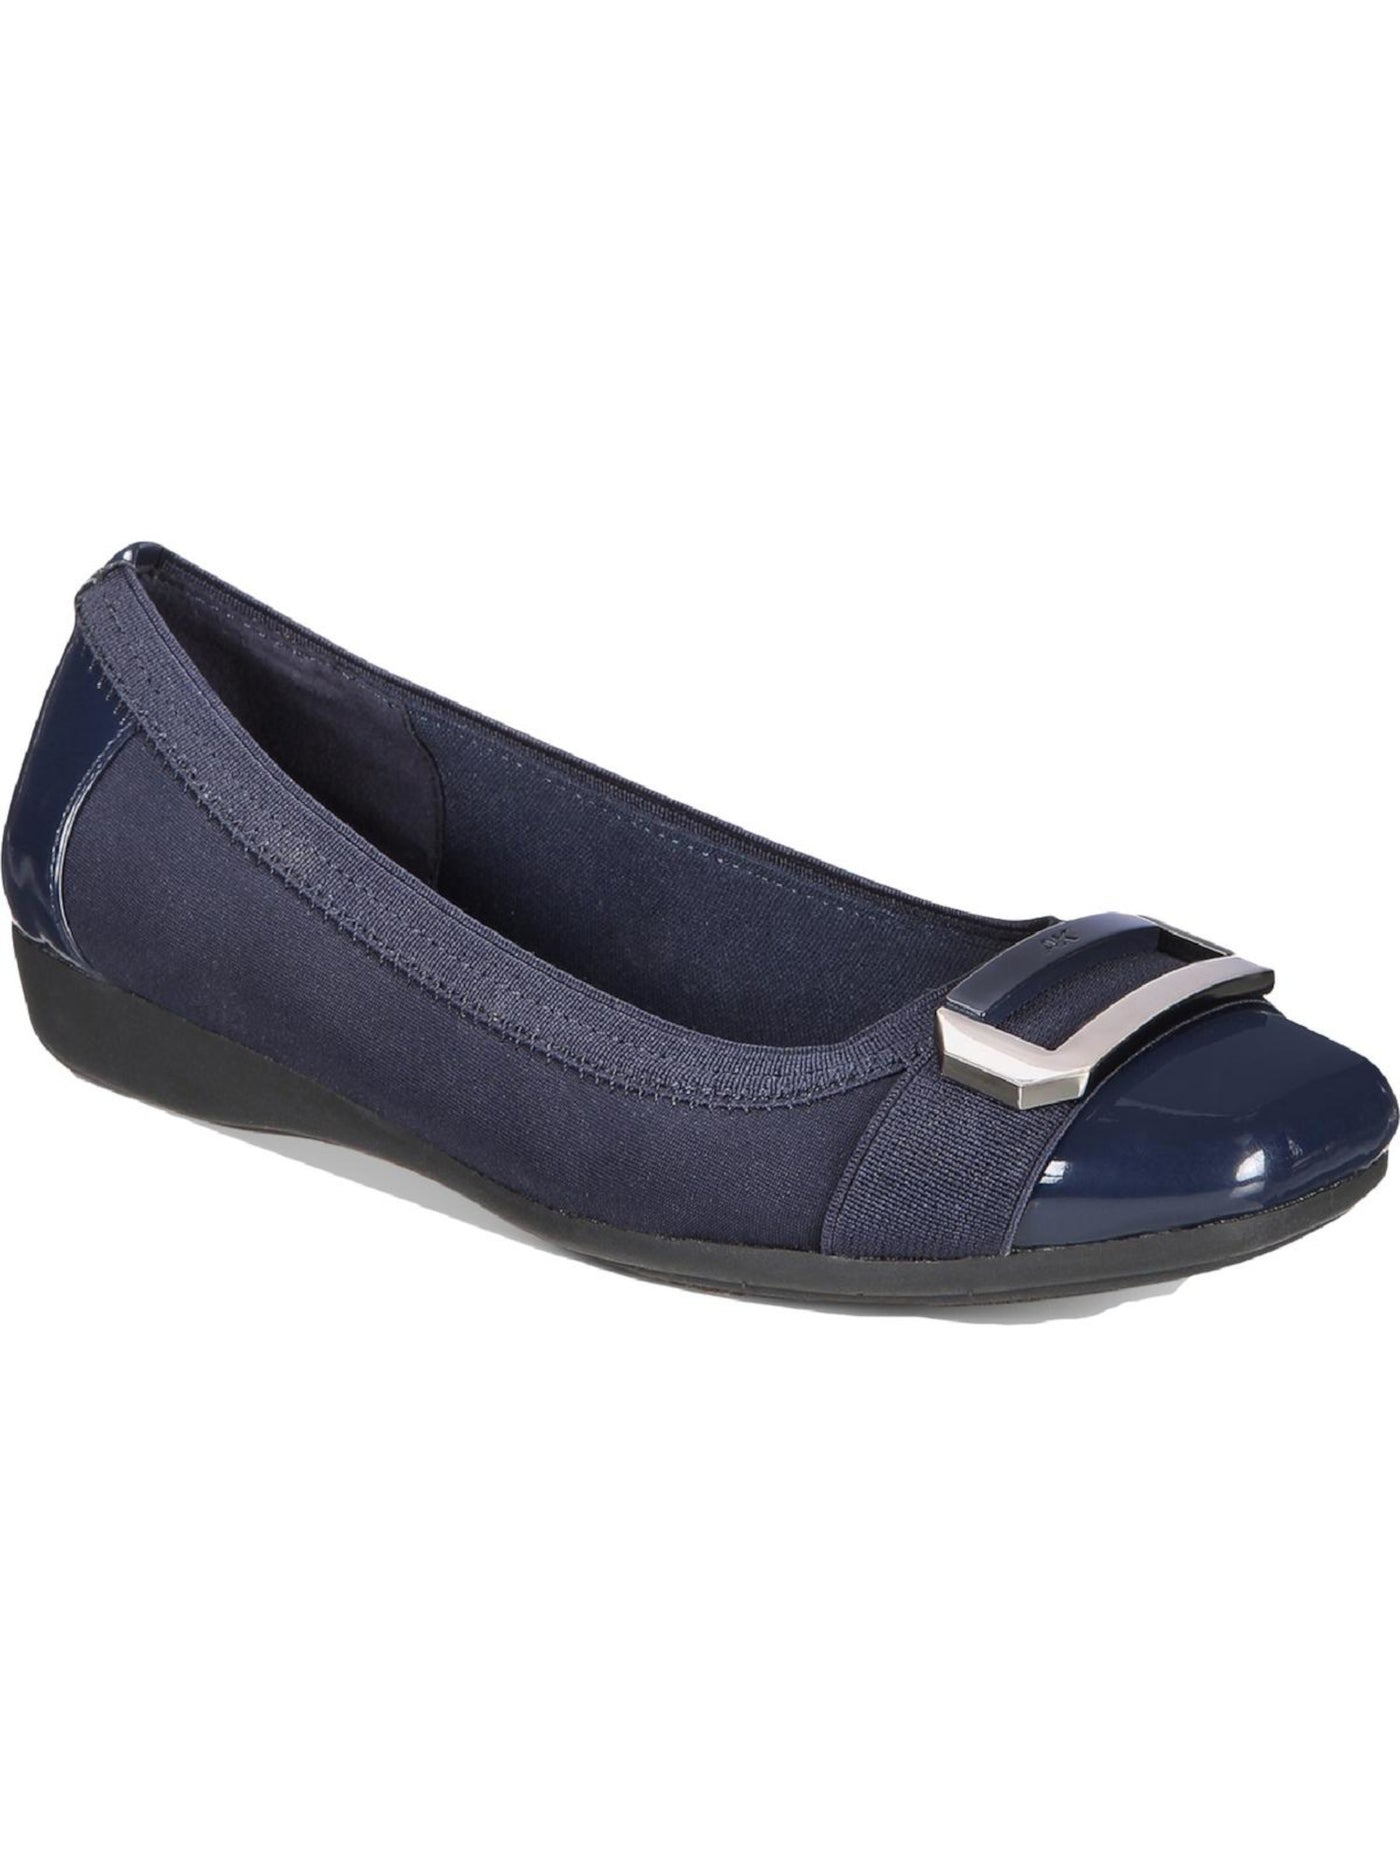 AK SPORT Womens Navy Stretch Lightweight Buckle Accent Cushioned Uplift Square Toe Wedge Slip On Flats Shoes 6 M